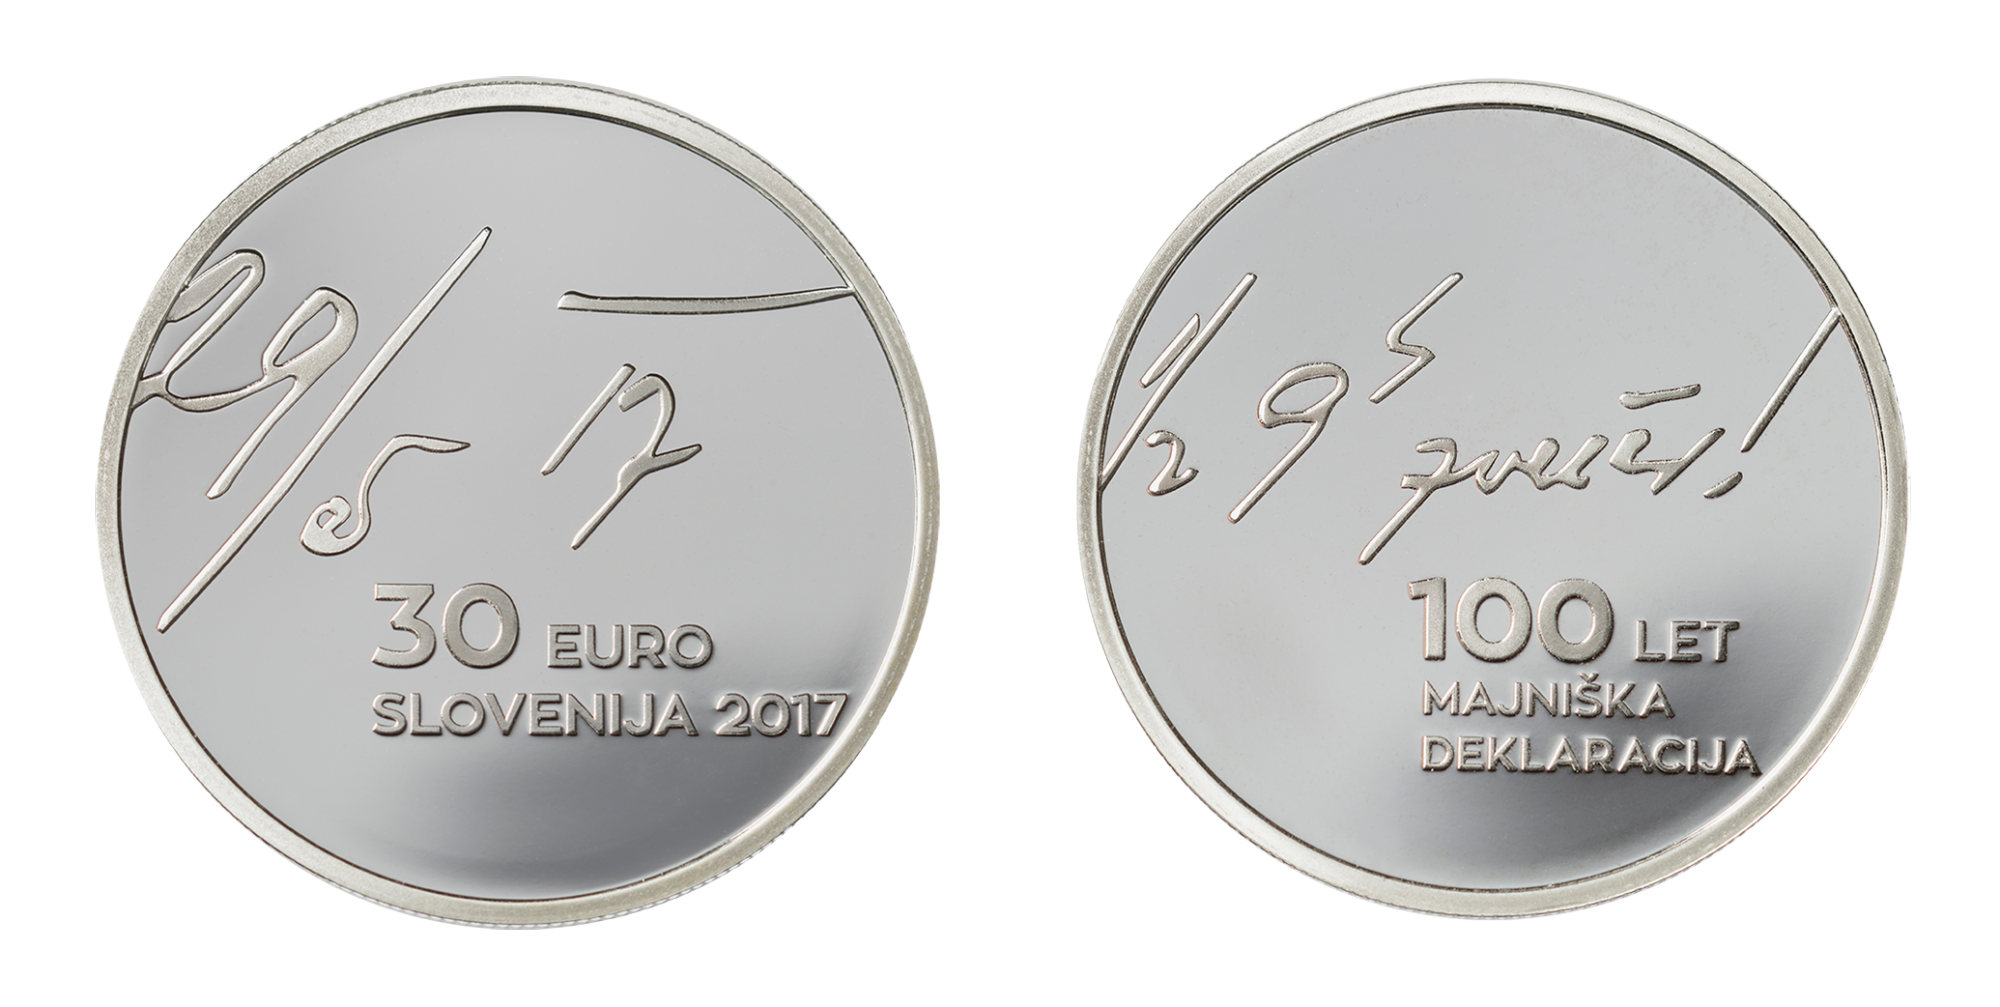 Collector coins and set of 2017 euro coins are available from 29 May